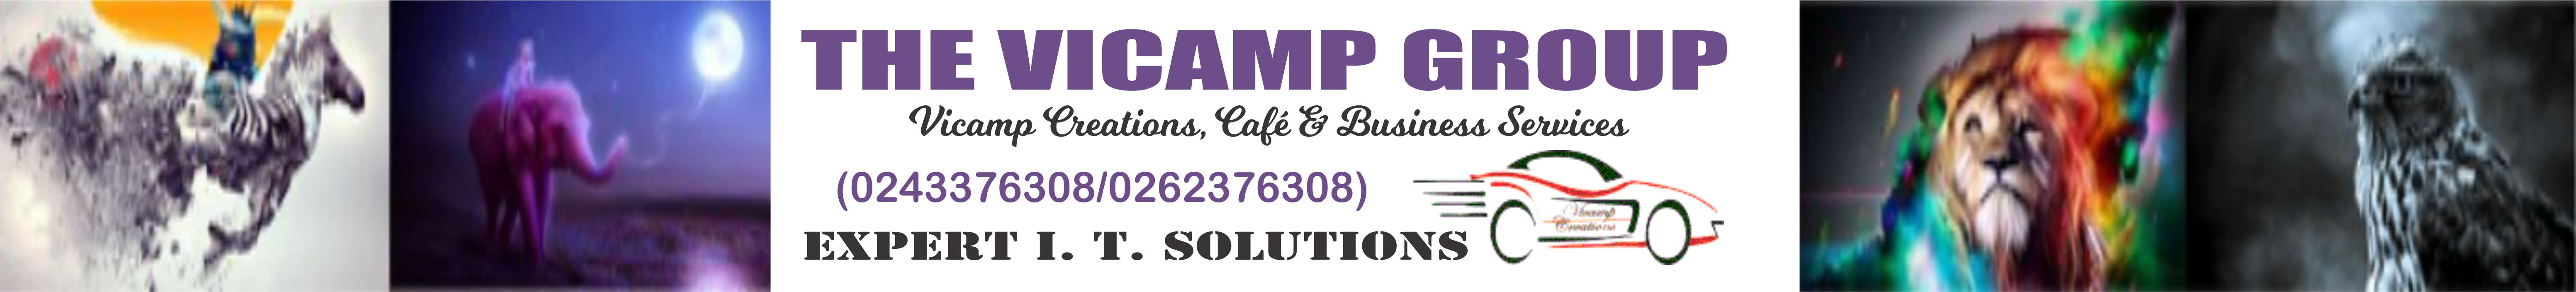 Vicamp Creations, Cafe & Business Services